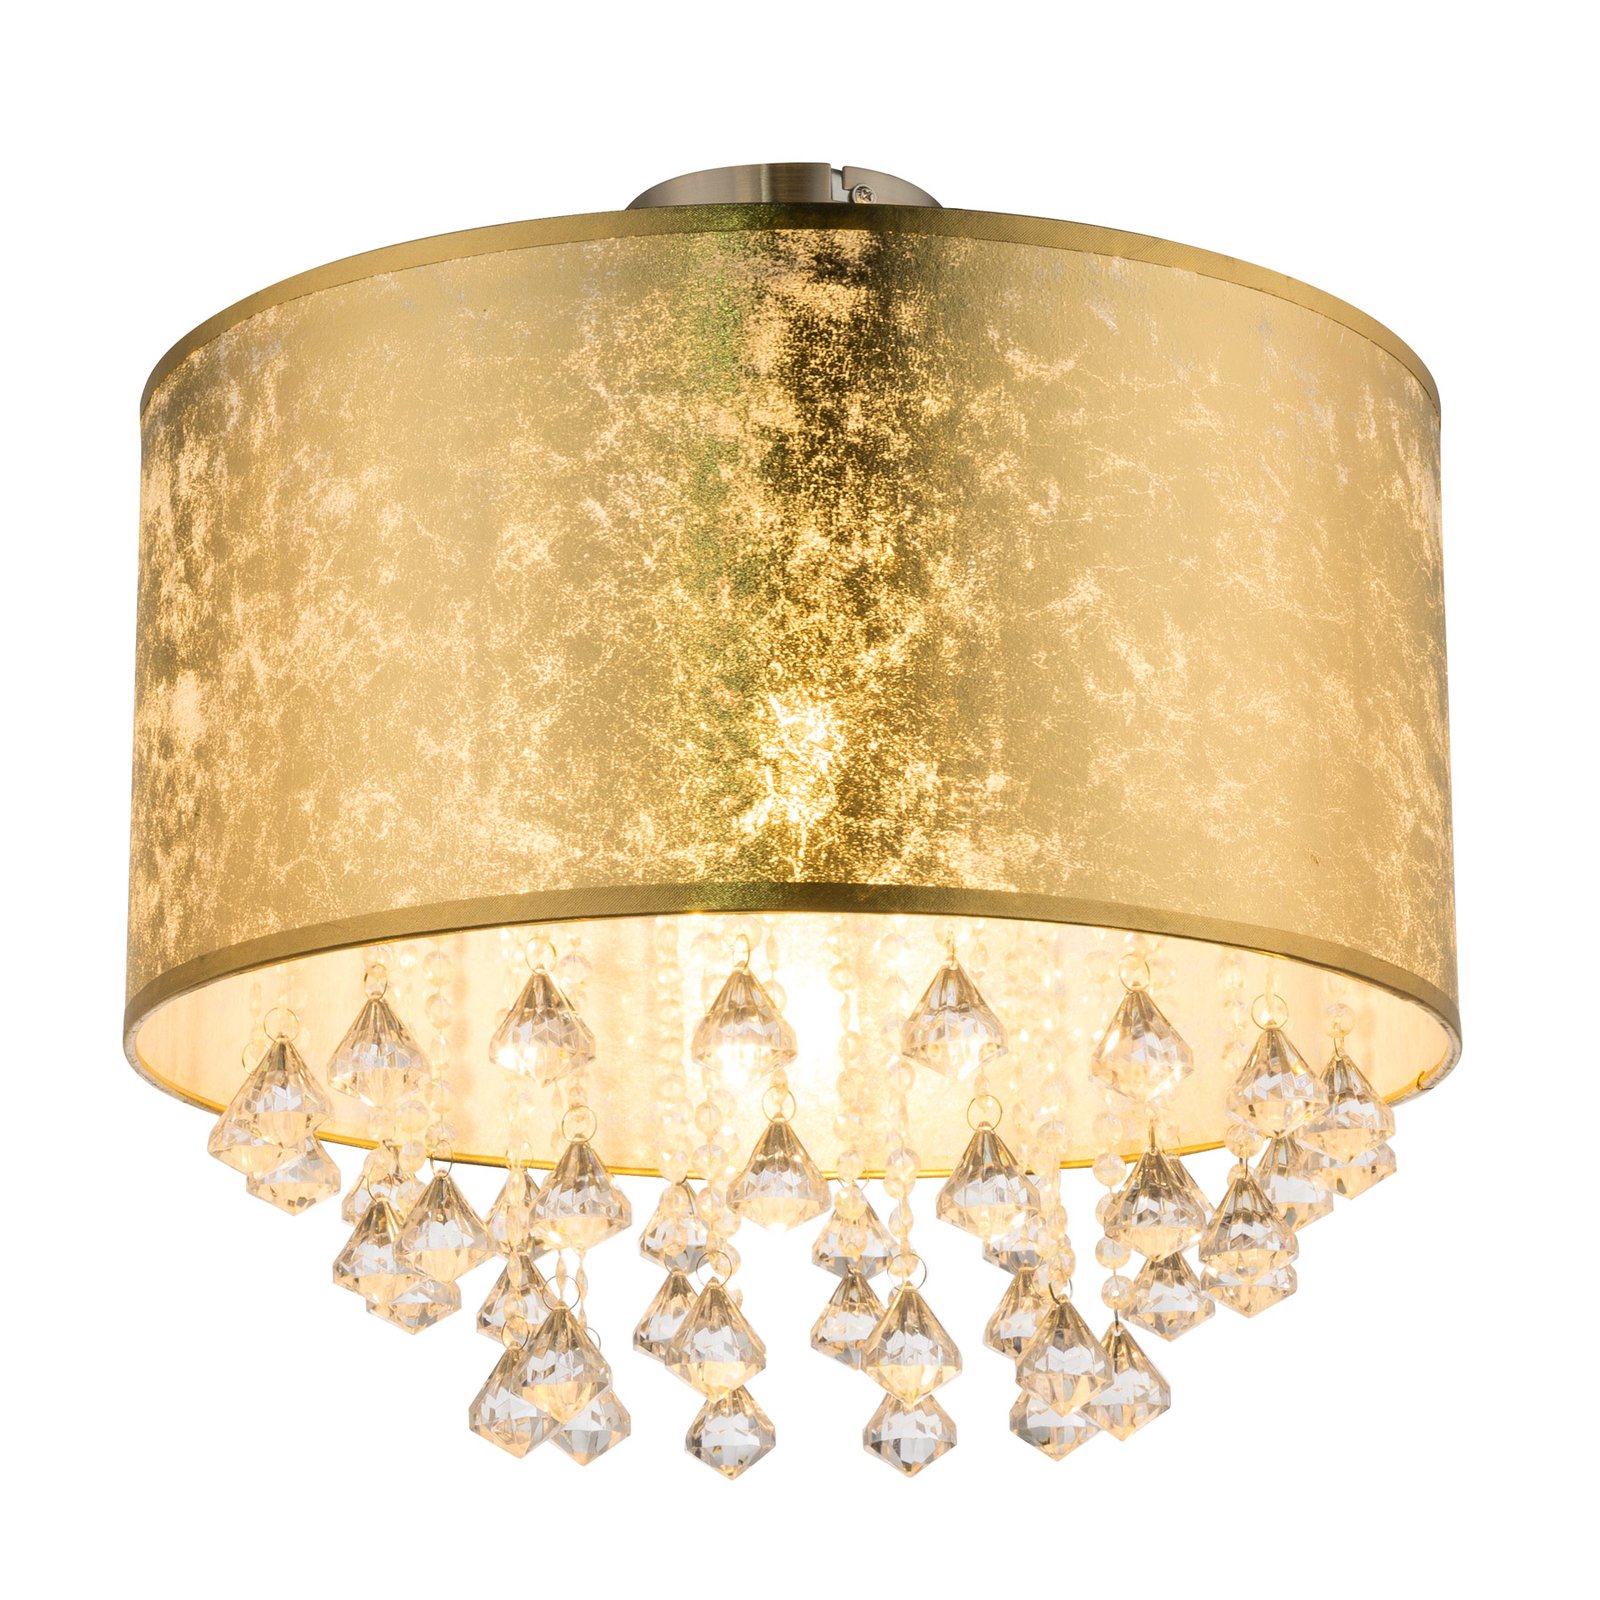 Amy ceiling lamp with acrylic crystals, gold leaf